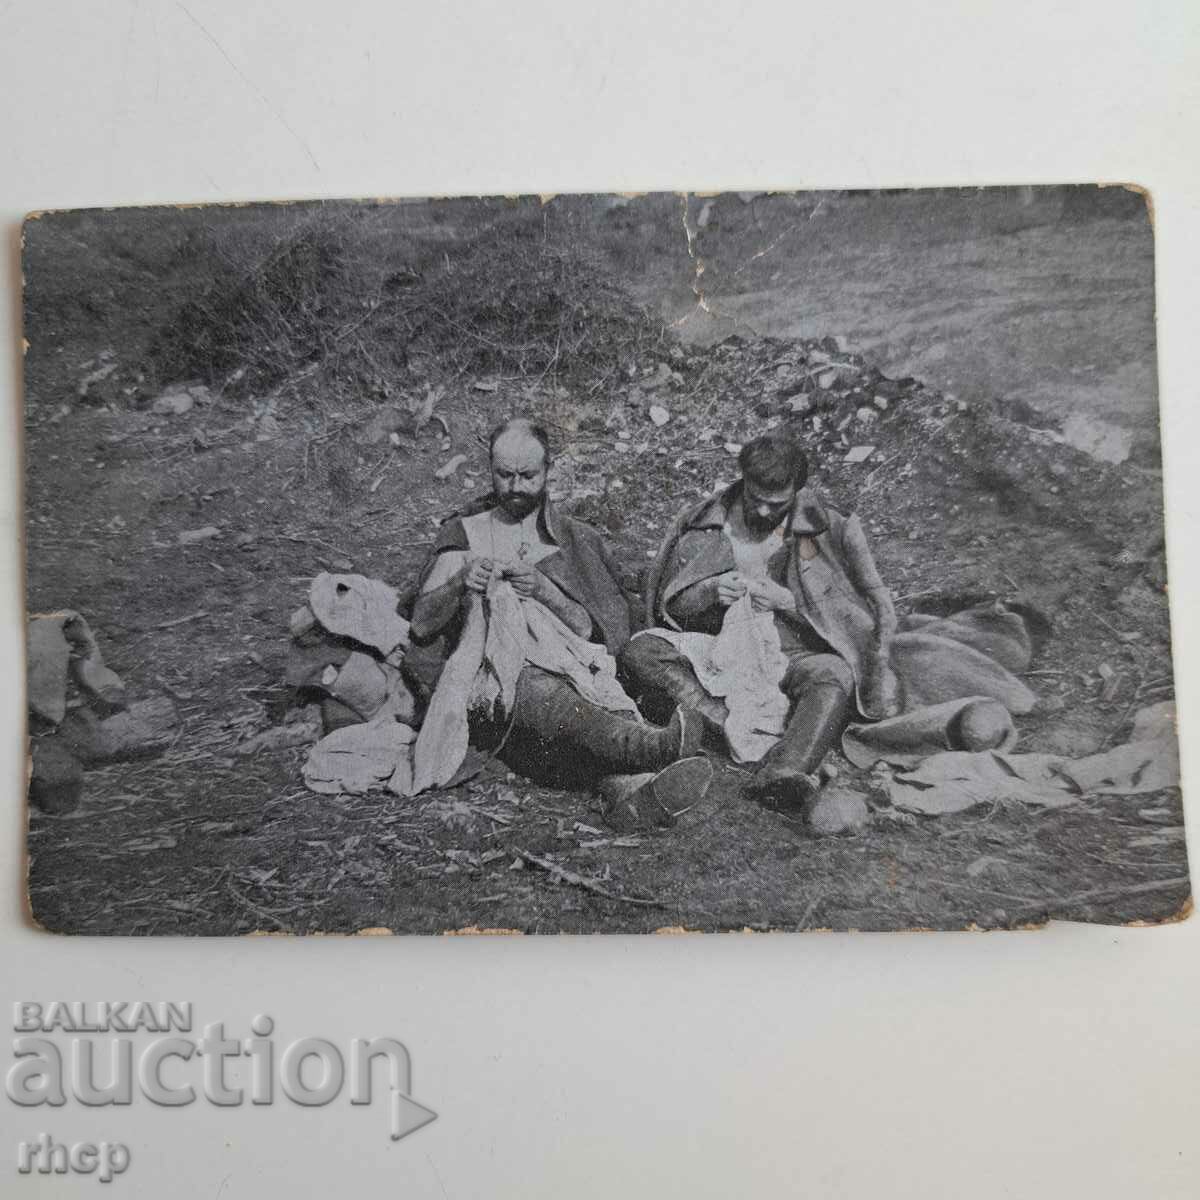 Soldiers at the front catching fleas PSV postcard